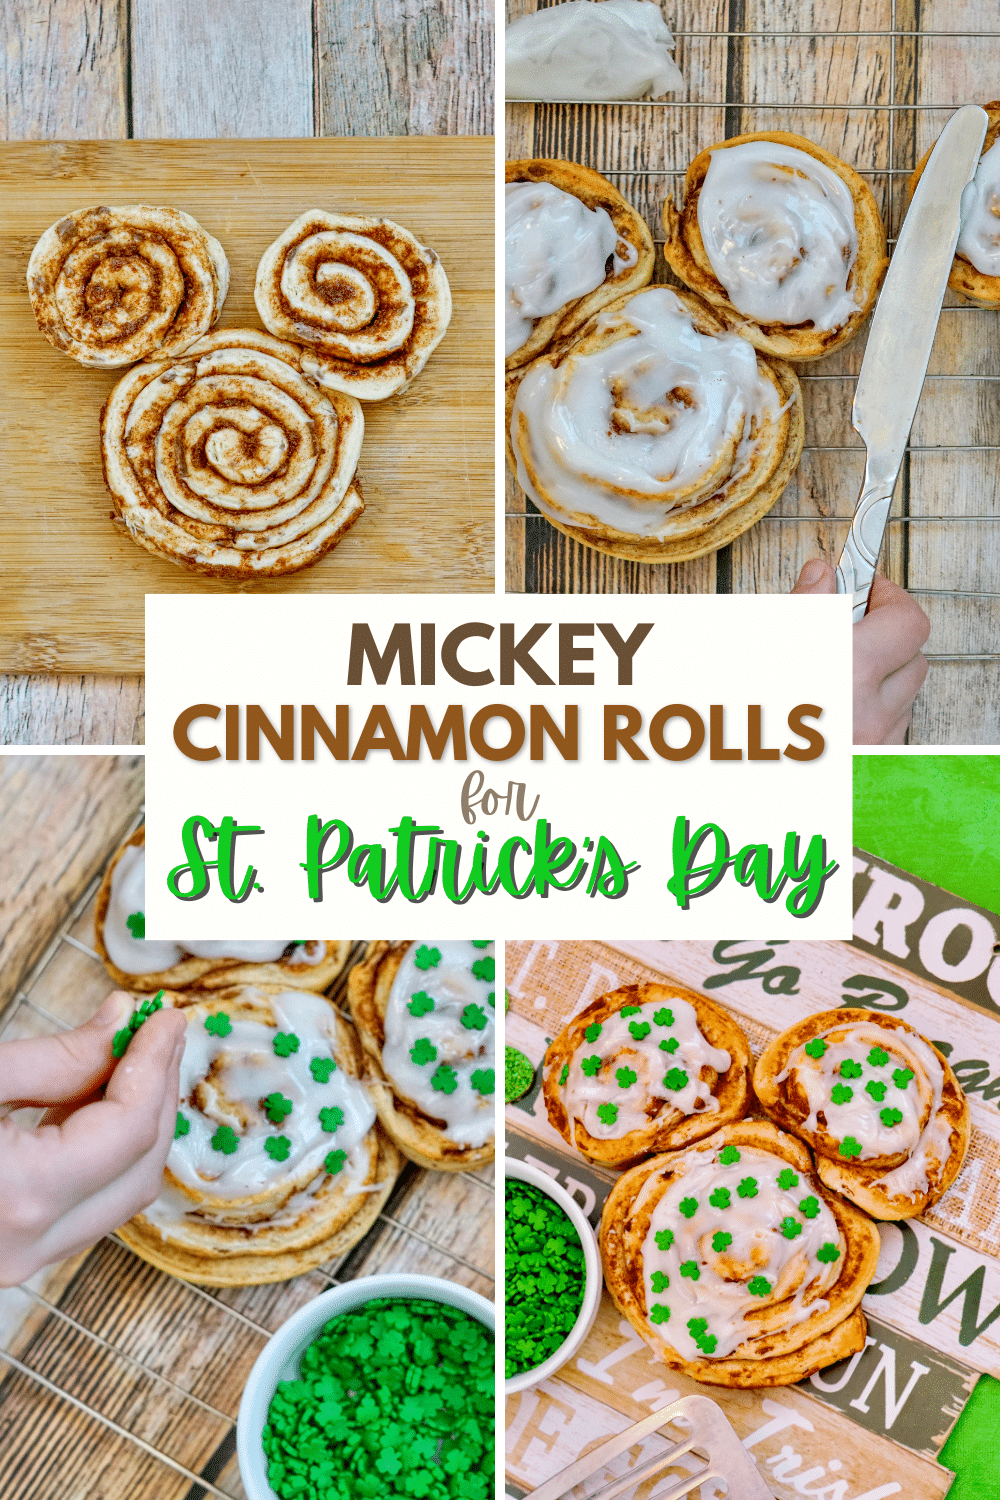 These Mickey Cinnamon Rolls for St. Patrick’s Day are the perfect way to celebrate the holiday. They are a quick yet festive breakfast. #mickeycinnamonrolls #stpatricksday #cinnamonrolls #mickeymouse #breakfast via @wondermomwannab